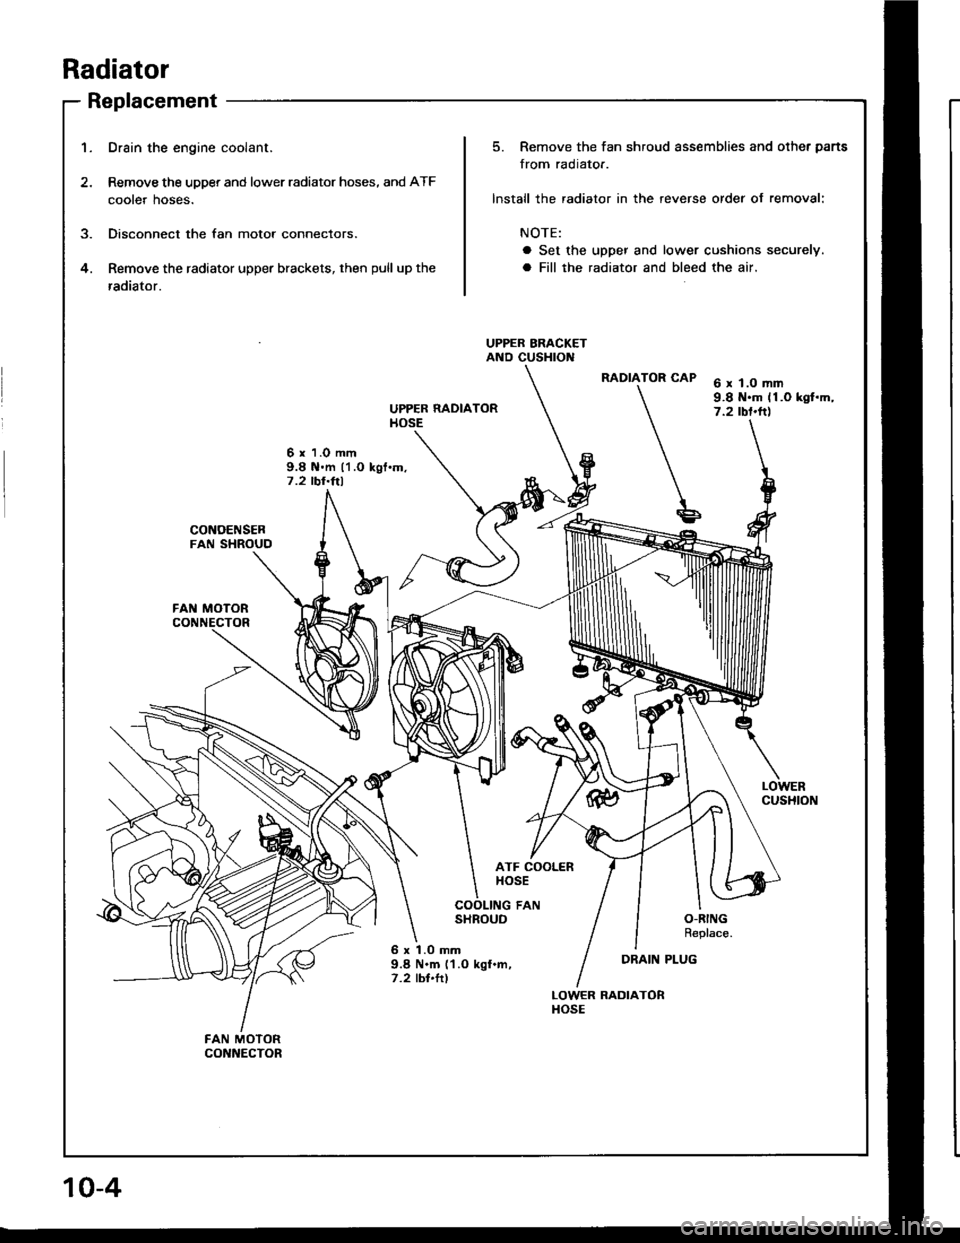 HONDA INTEGRA 1994 4.G Workshop Manual Radiator
Replacement
1.Drain the engine coolant.
Remove the upper and lower radiator hoses, and ATF
cooter noses.
Disconnect the fan motor connectors.
Remove the radiator upper brackets, then pull up 